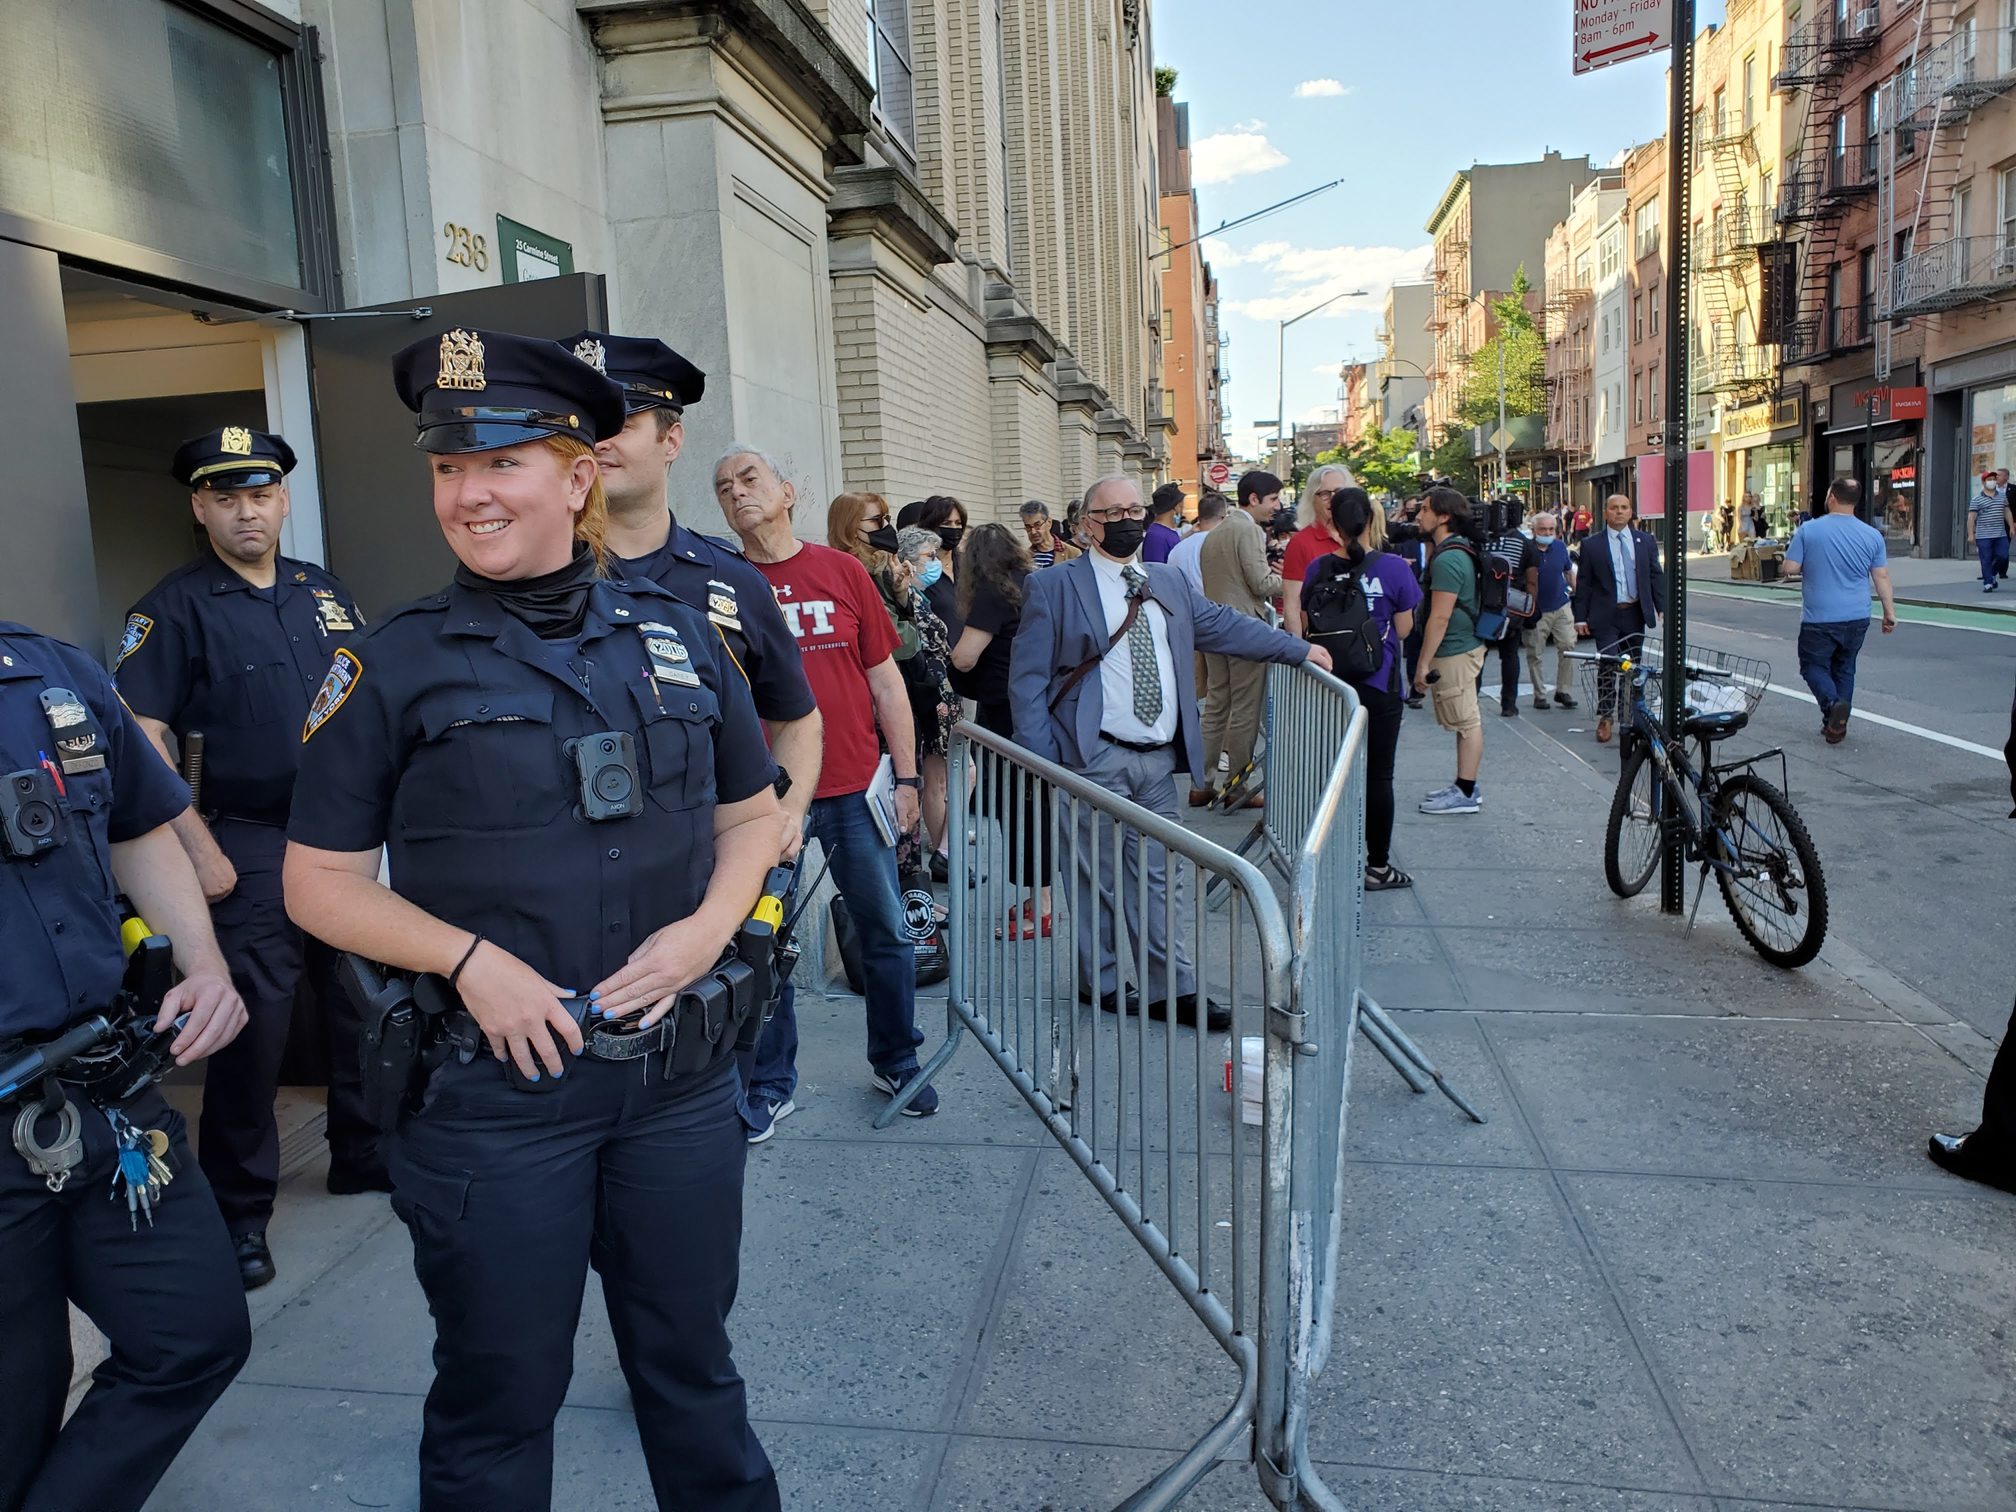 NYPD 24th Precinct on X: Summer=crowds. Protect your stuff. We